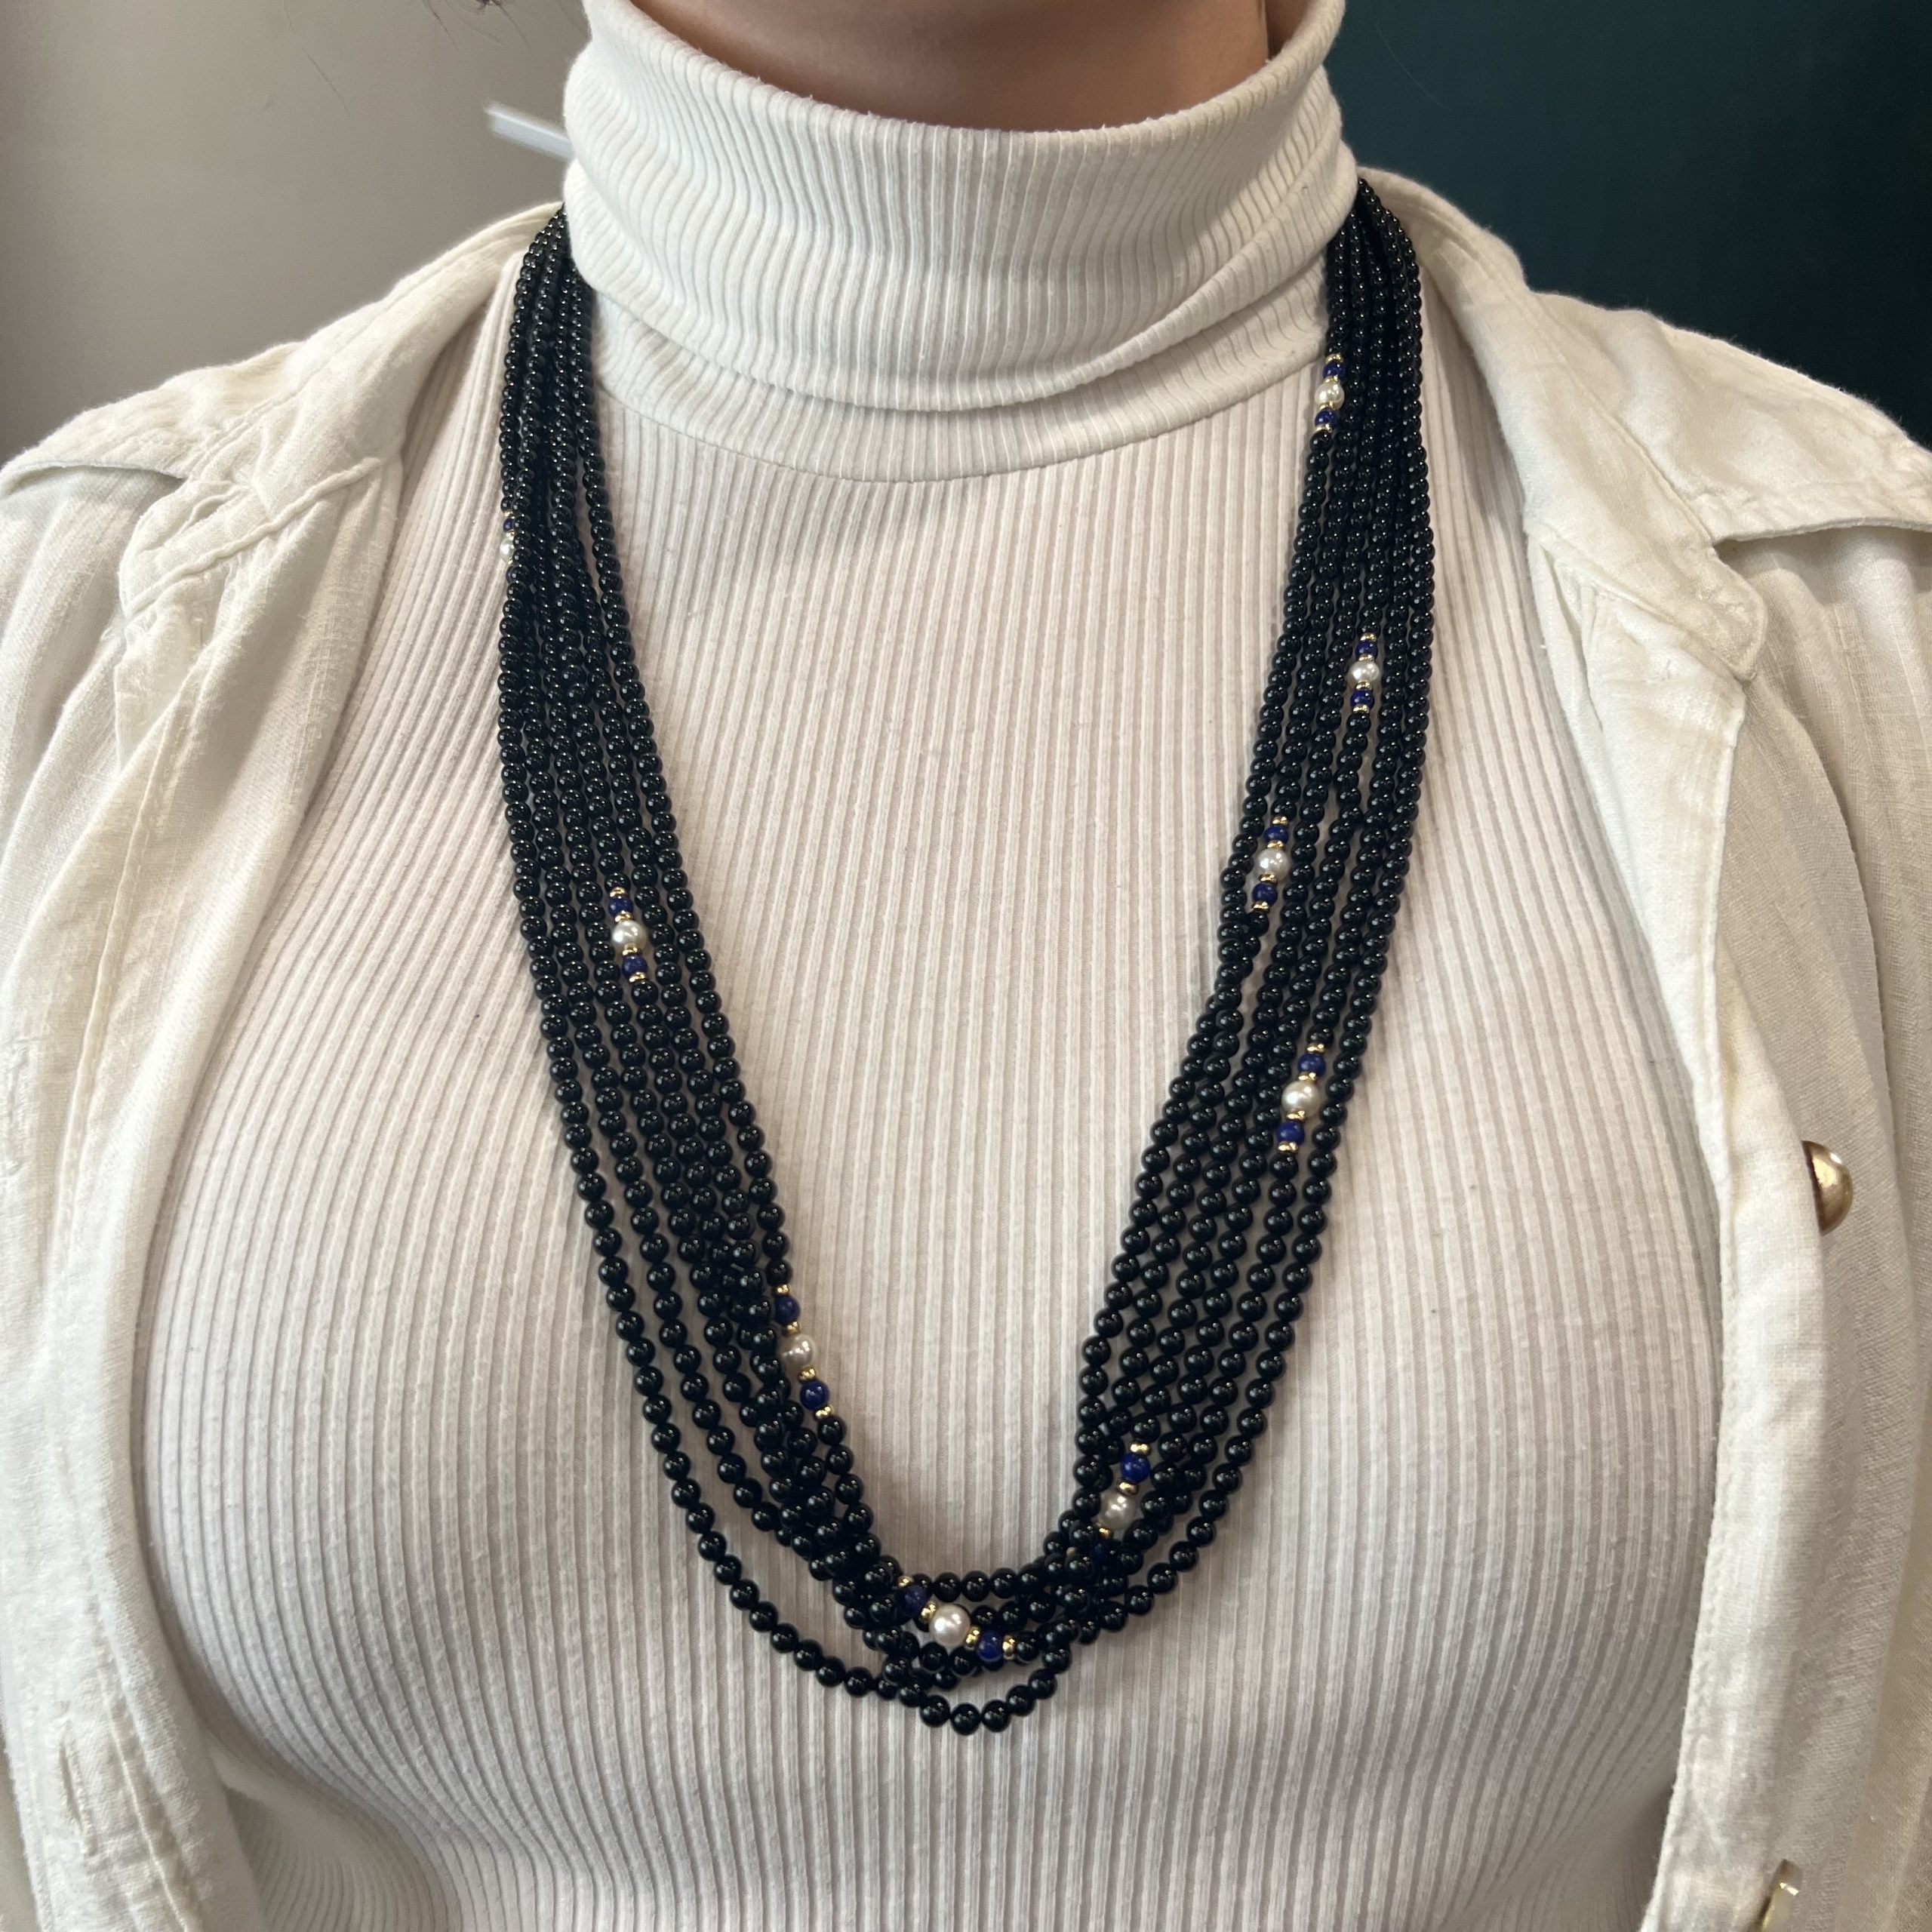 2 Layer Onyx Necklace With German Silver Hollow Beads, Black And White